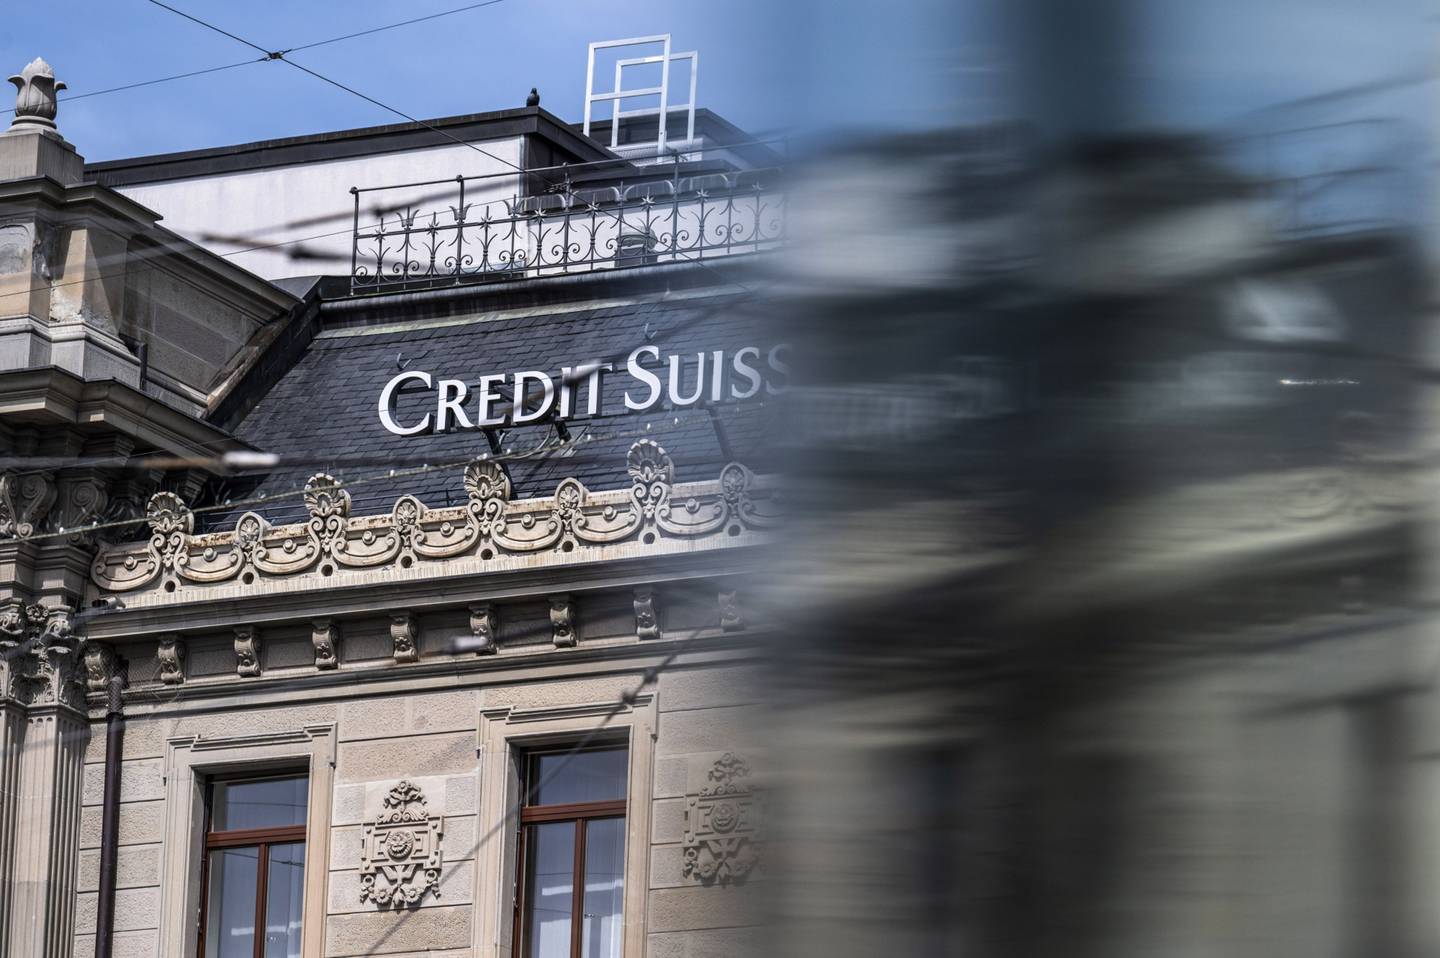 The judgment is another blow to the tarnished reputation of Credit Suisse.